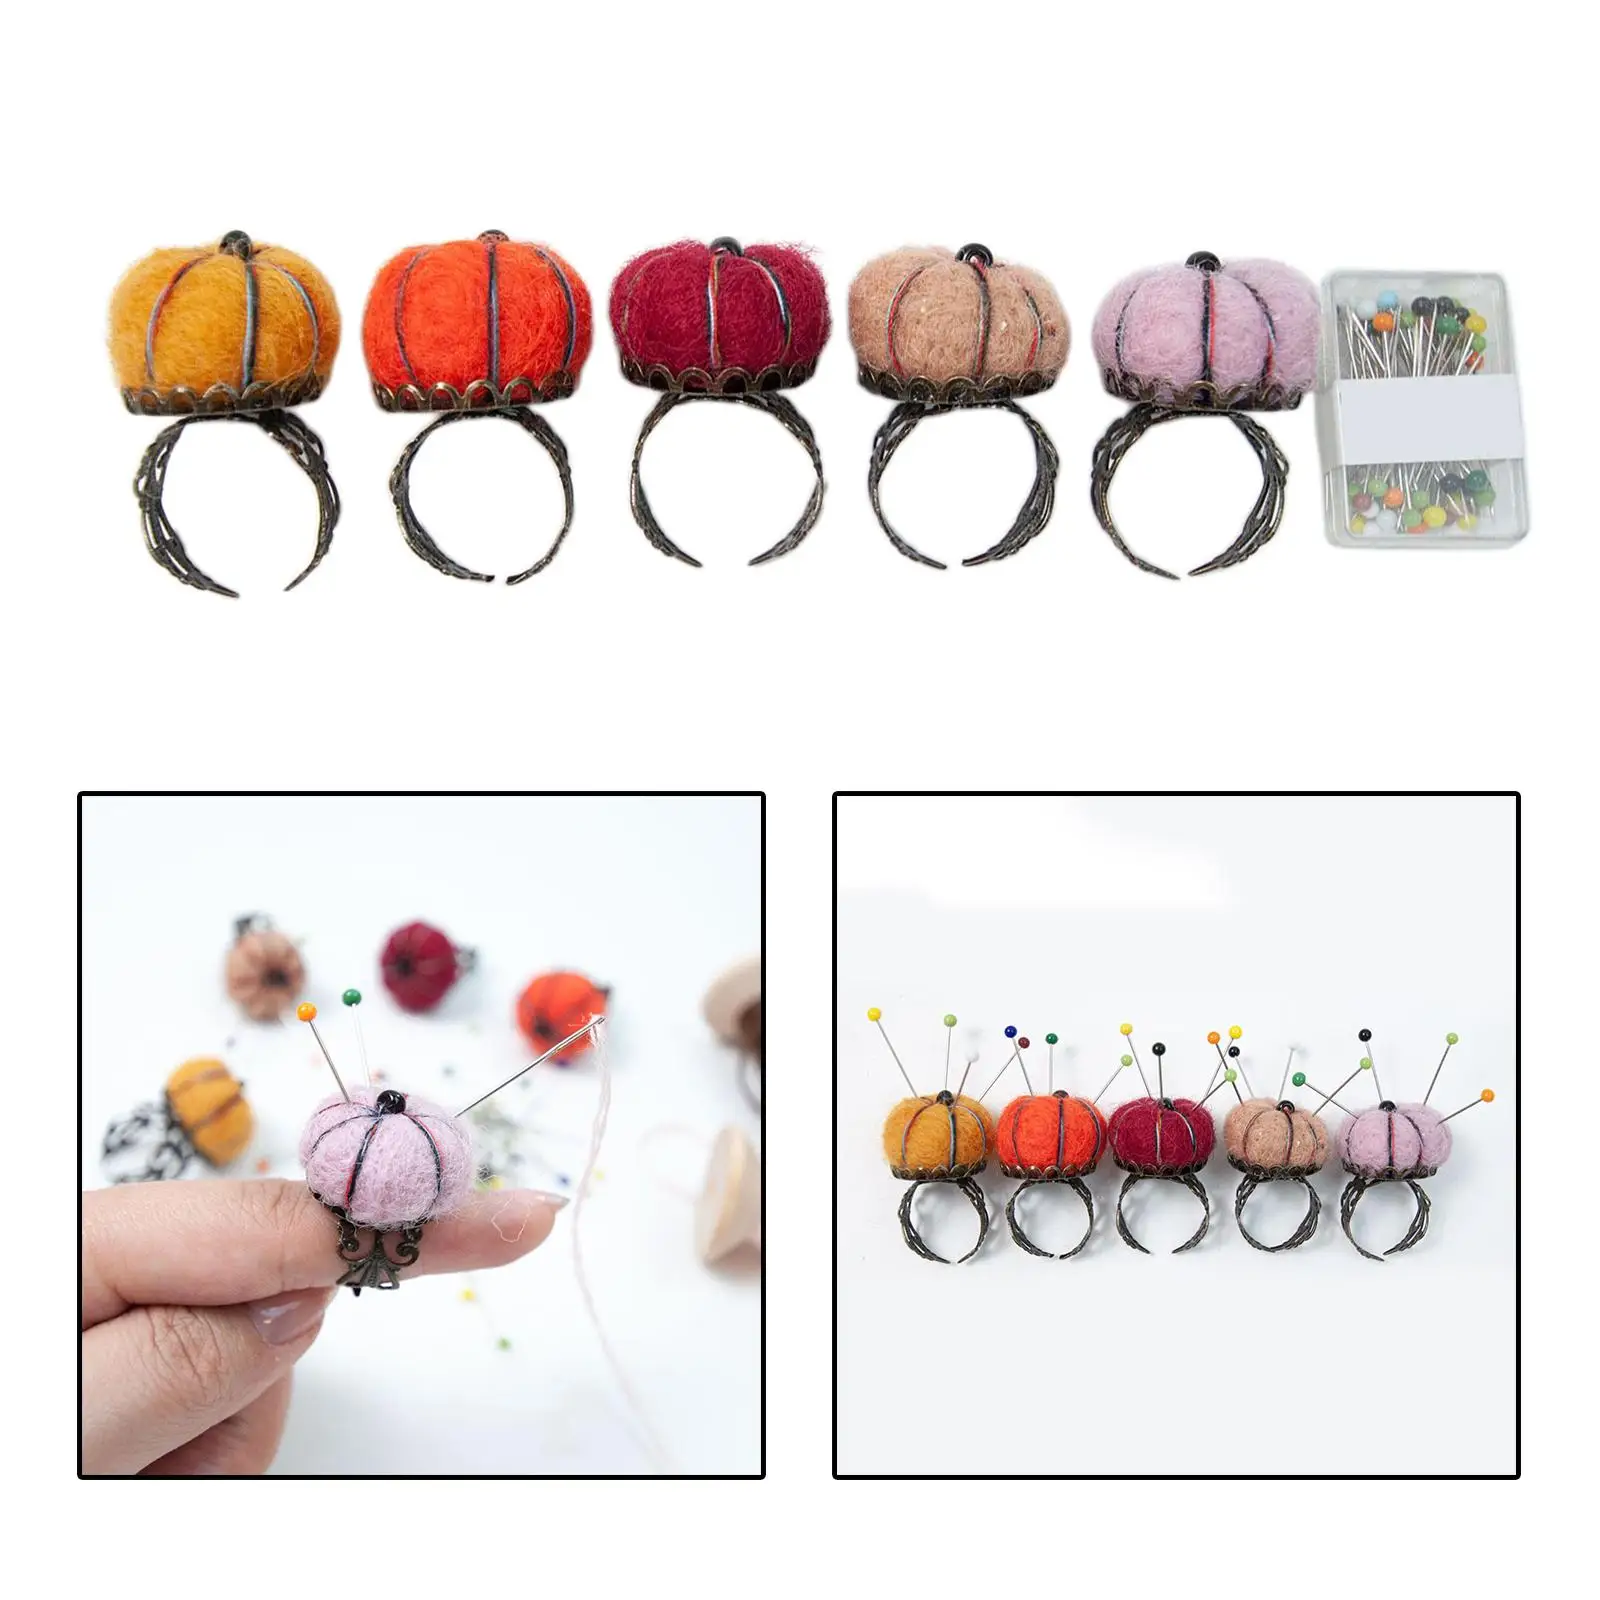 5x Felt Pincushions Sewing Supply Insert Pin Cushion Assorted Color Handcraft Cute Pumpkin Shaped for Quilting Sewing Accessory